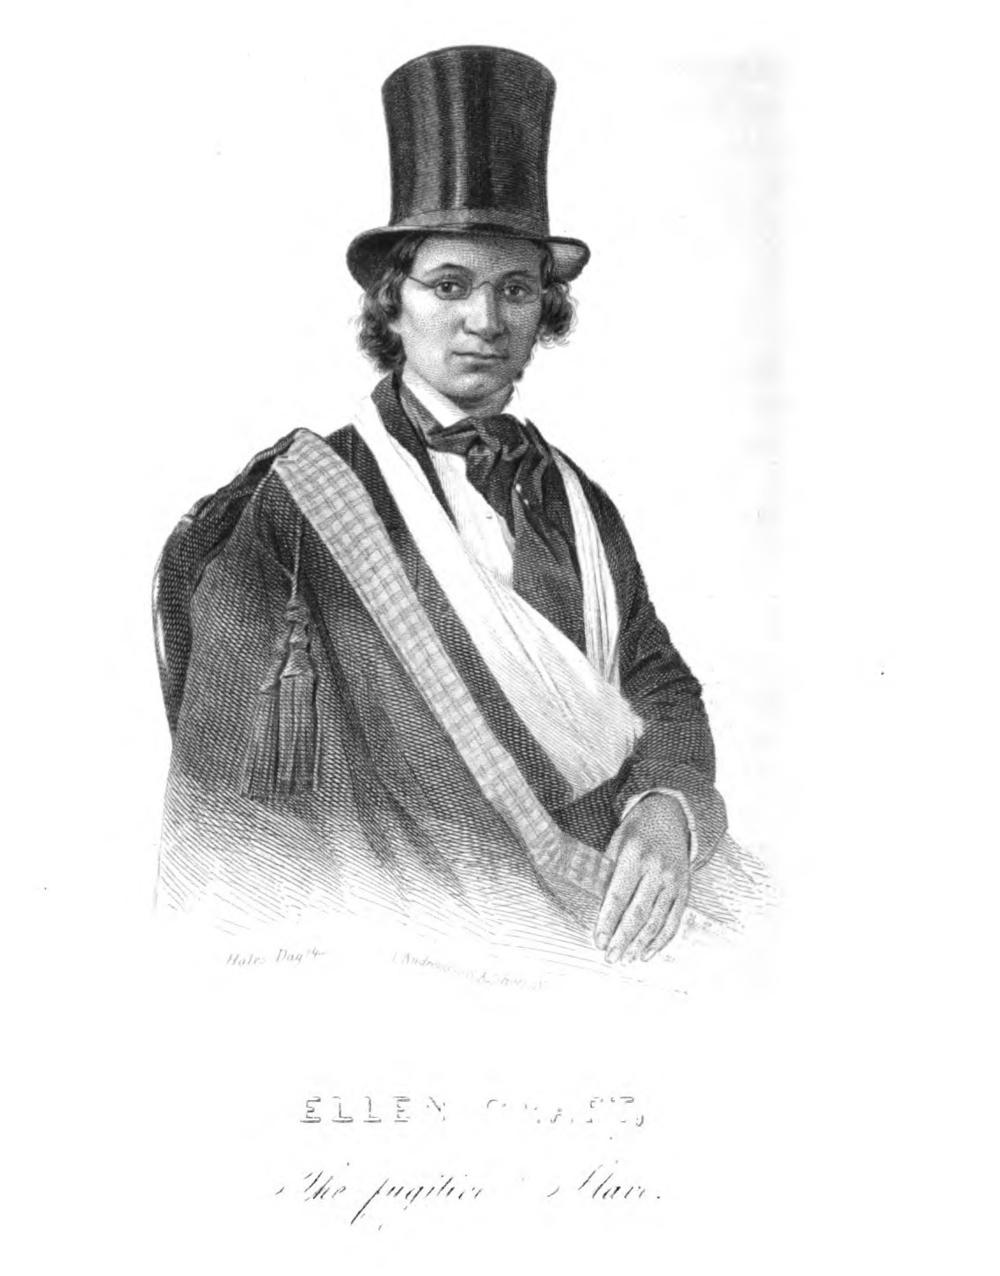 Ellen Craft dressed in disguise as a man in which she fled slavery in Georgia.